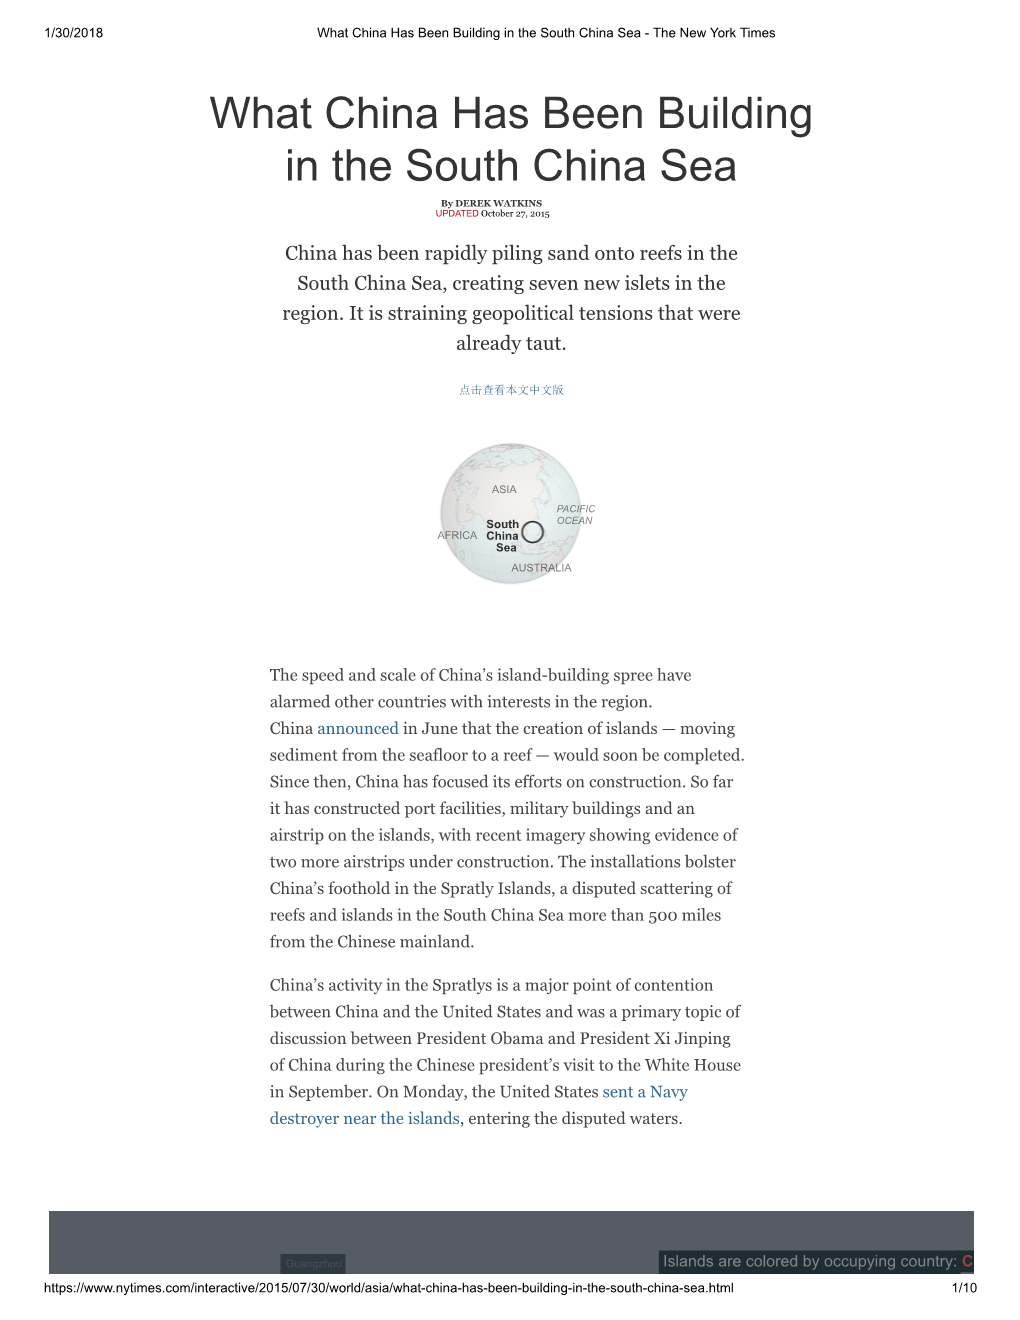 What China Has Been Building in the South China Sea - the New York Times